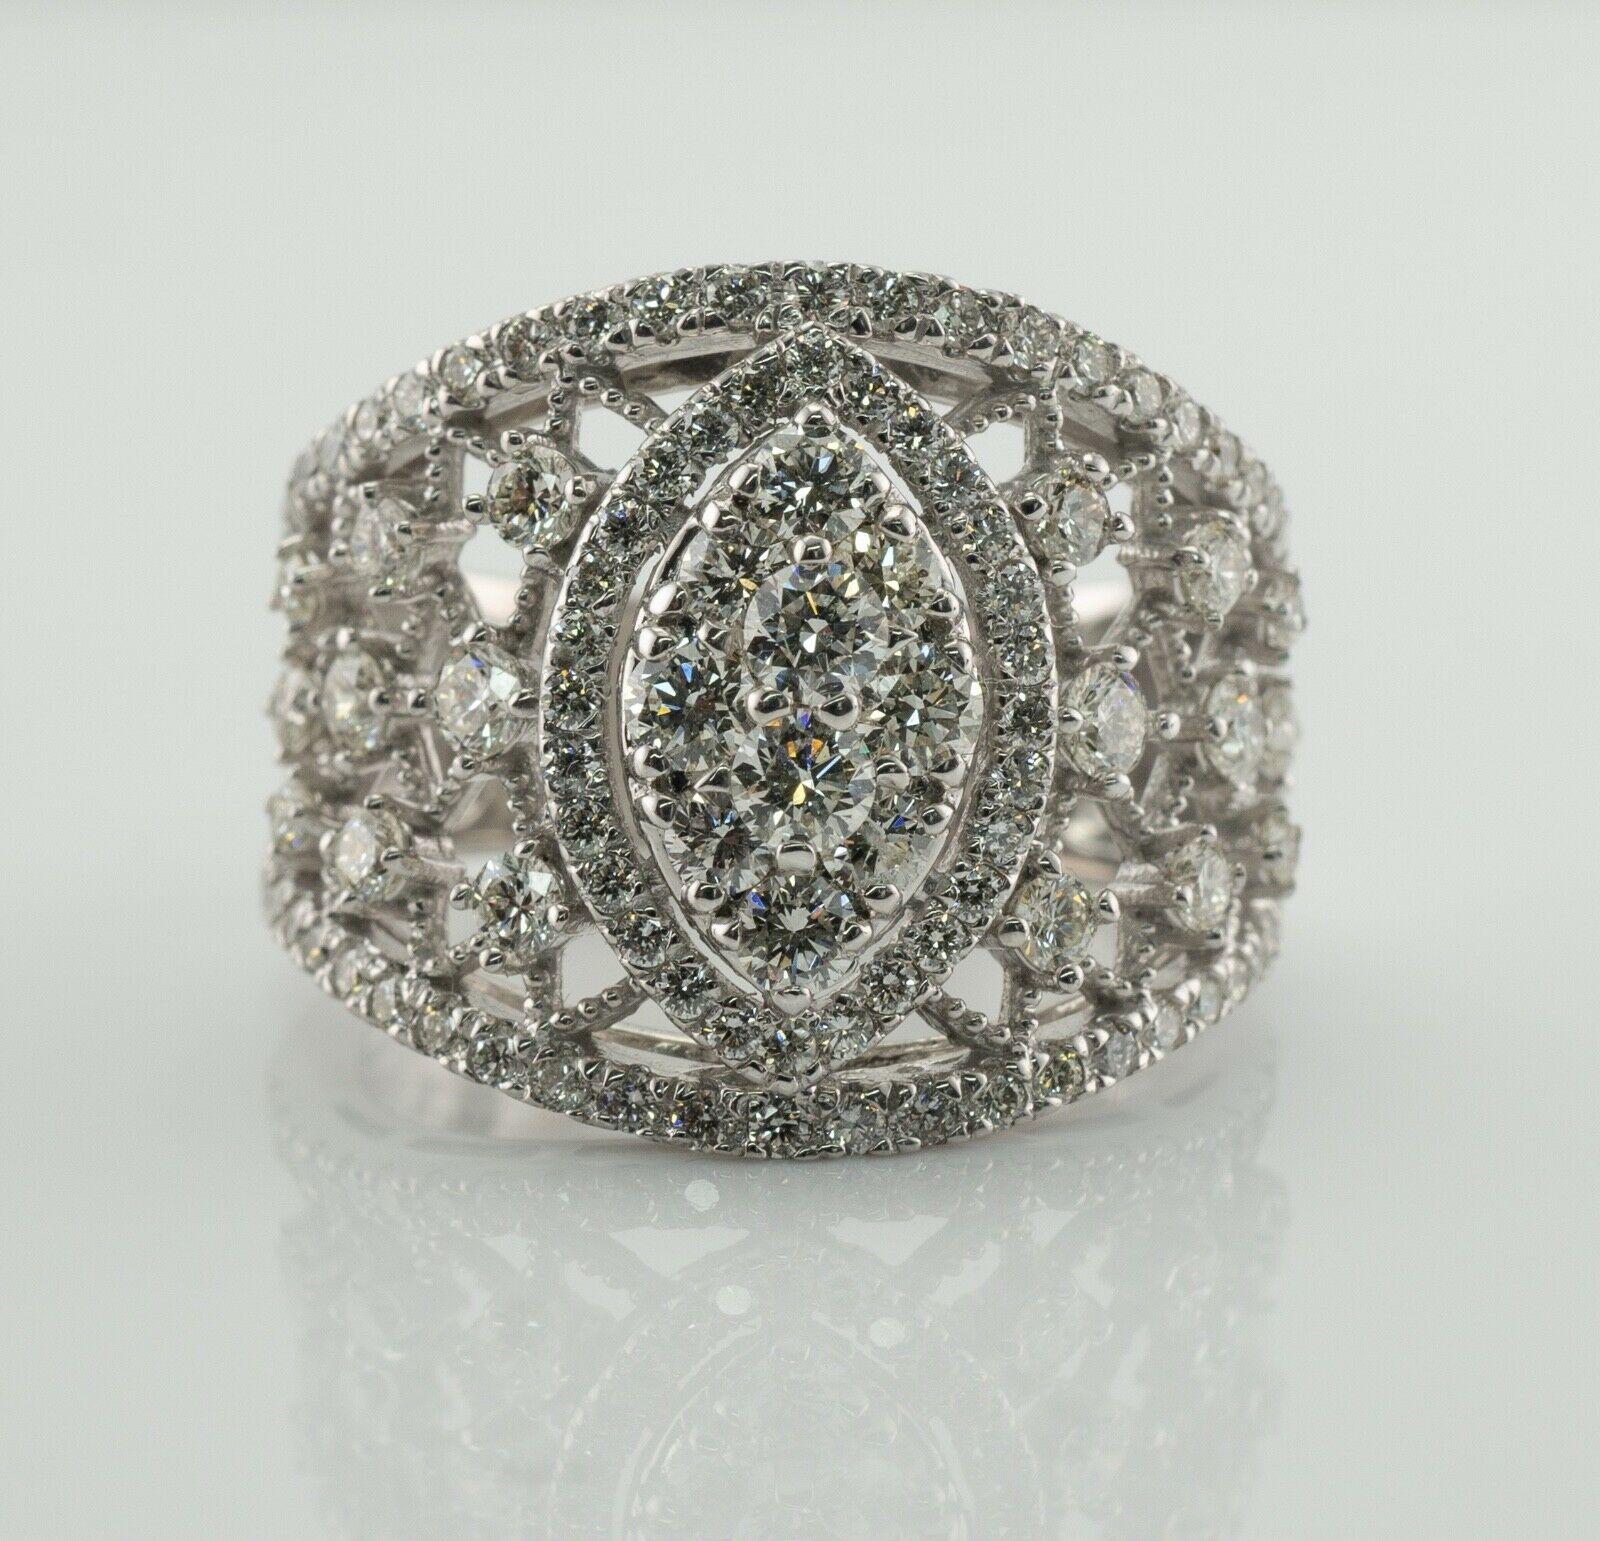 Diamond Ring 14K White Gold Wide Cocktail 1.45cts Cluster

This estate ring was a part of estate jewelry auction, the tag is still attached.
It is crafted in solid 14K White Gold and set with natural round brilliant cut diamonds.
The diamonds total